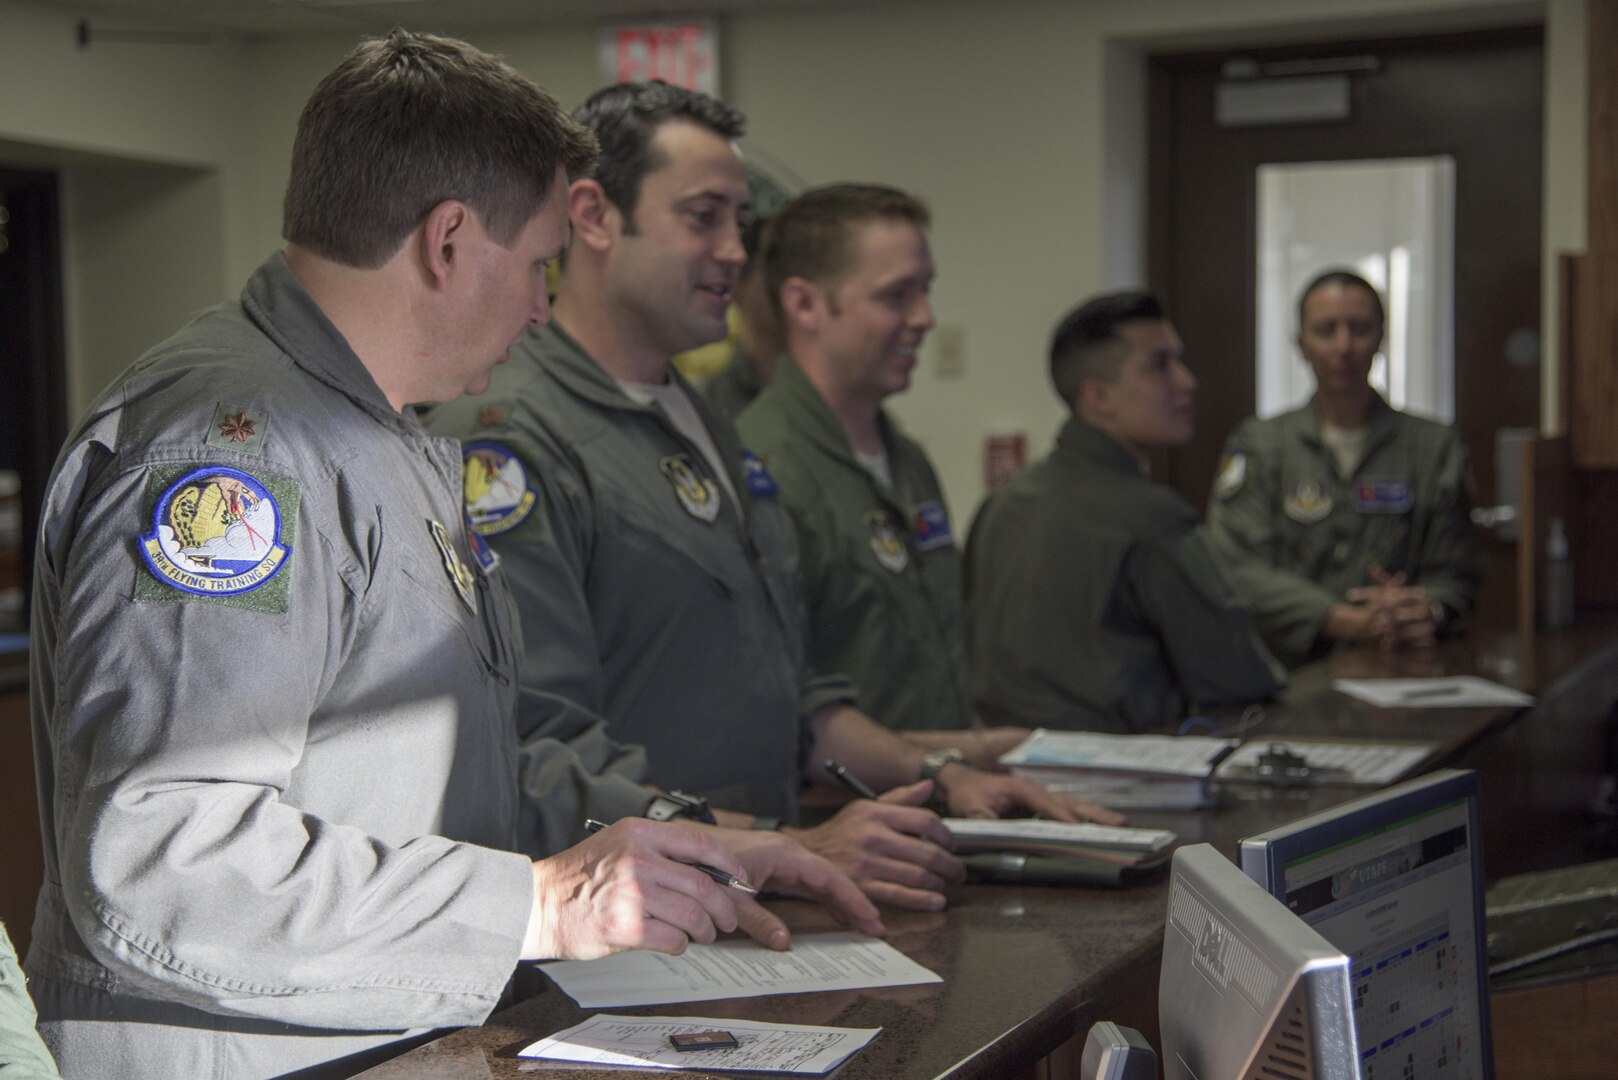 Members of the 39th Flying Training Squadron receive a pre-flight briefing May 4, 2017, at Joint Base San Antonio-Randolph, Texas during the Cobras in the Clouds exercise. The exercise gave 39th FTS members a chance to practice their war-time mission of taking control of the training mission of the 12th Operations Group. (U.S. Air Force photo by Senior Airman Stormy Archer)